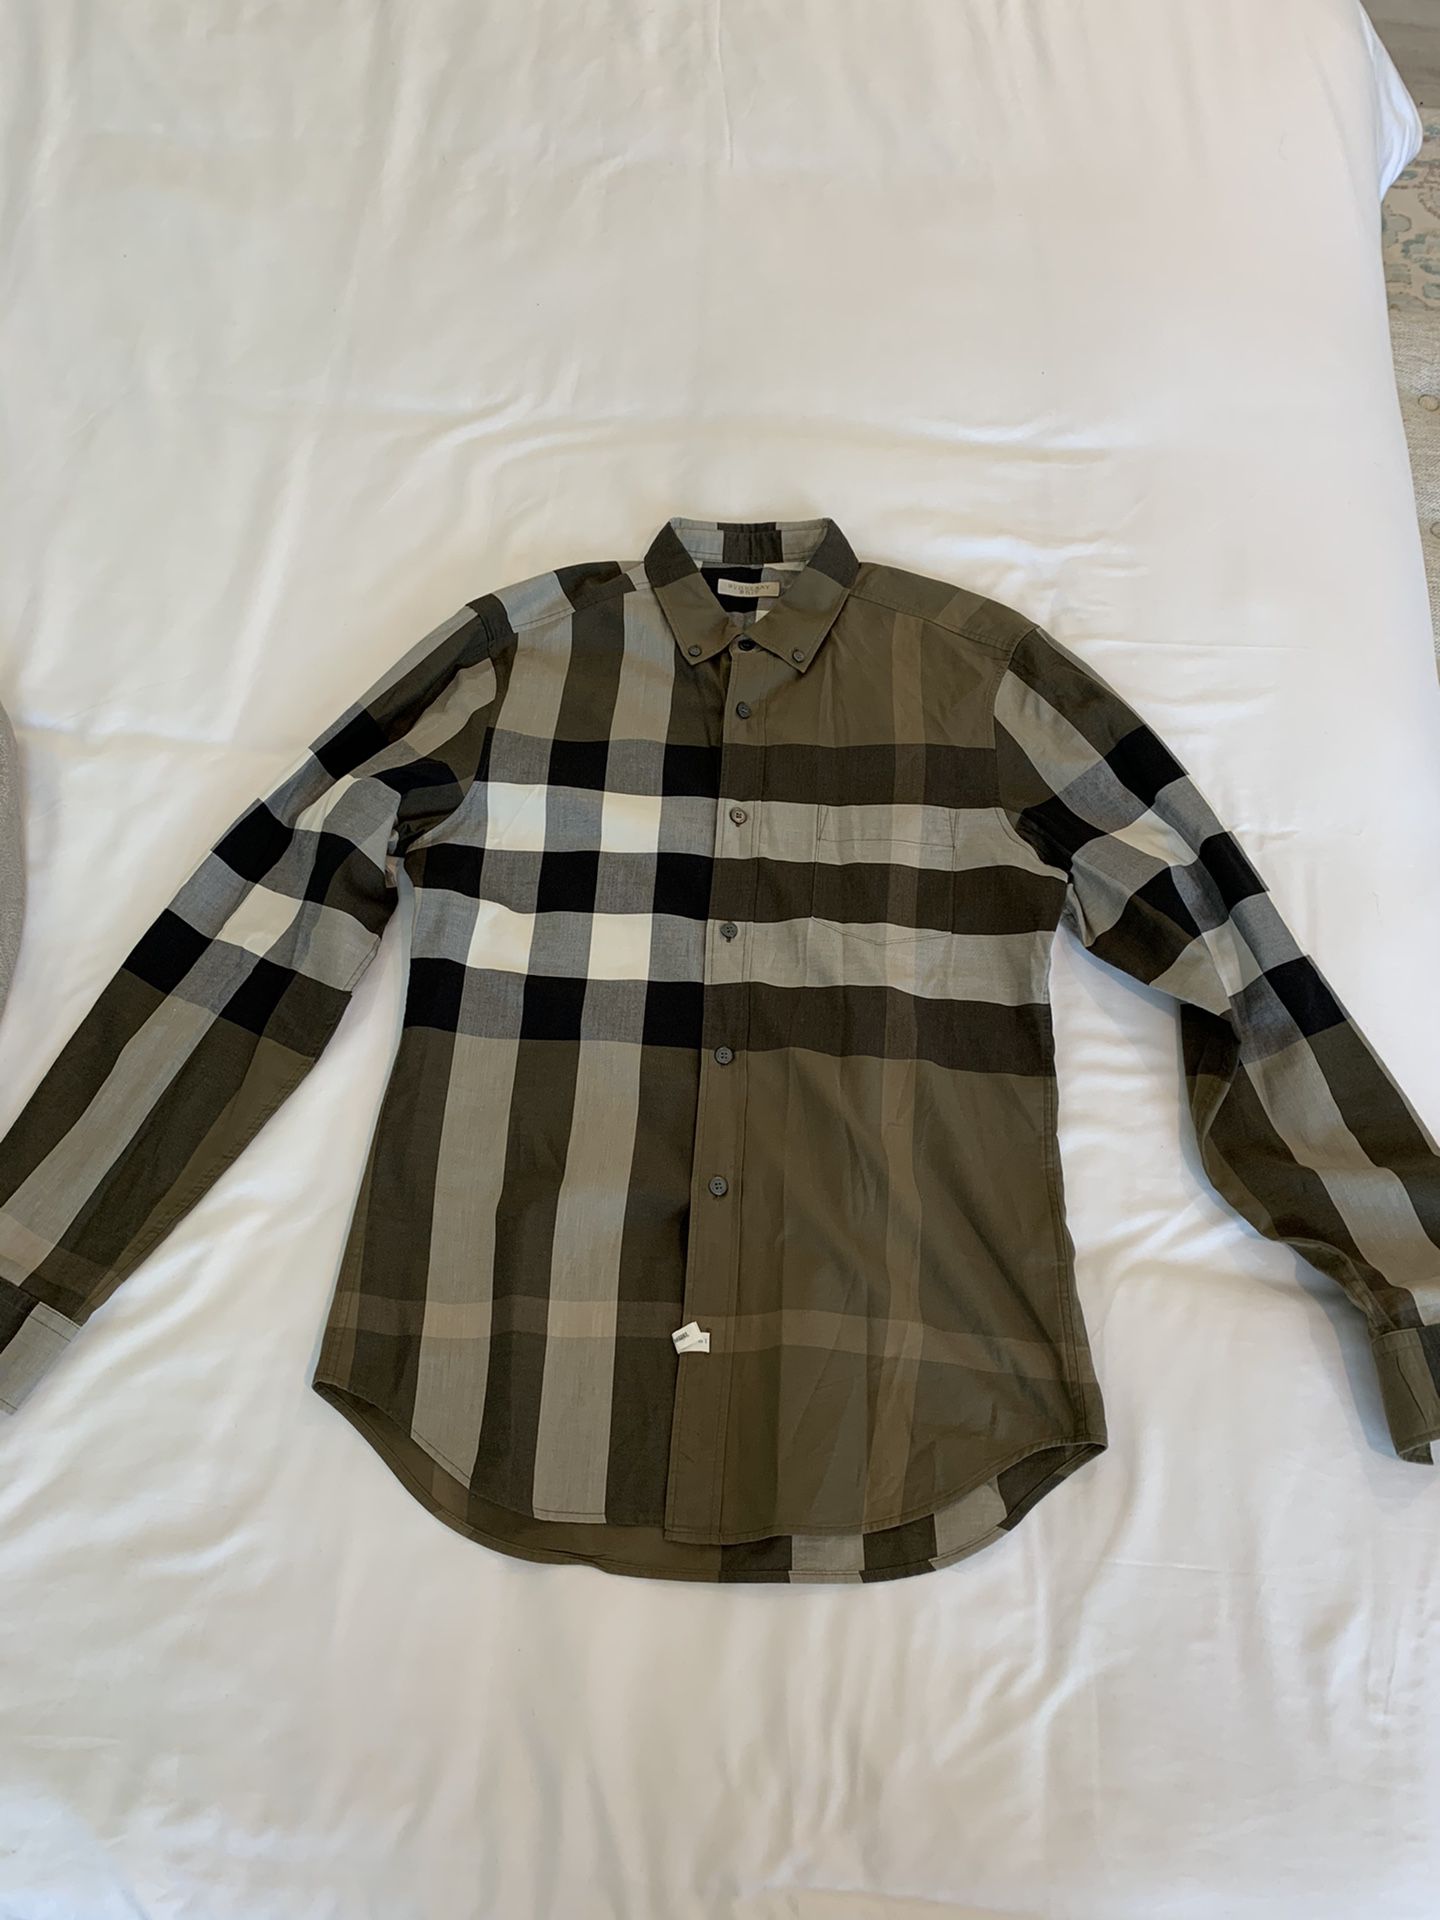 Authentic Burberry shirt (olive green)